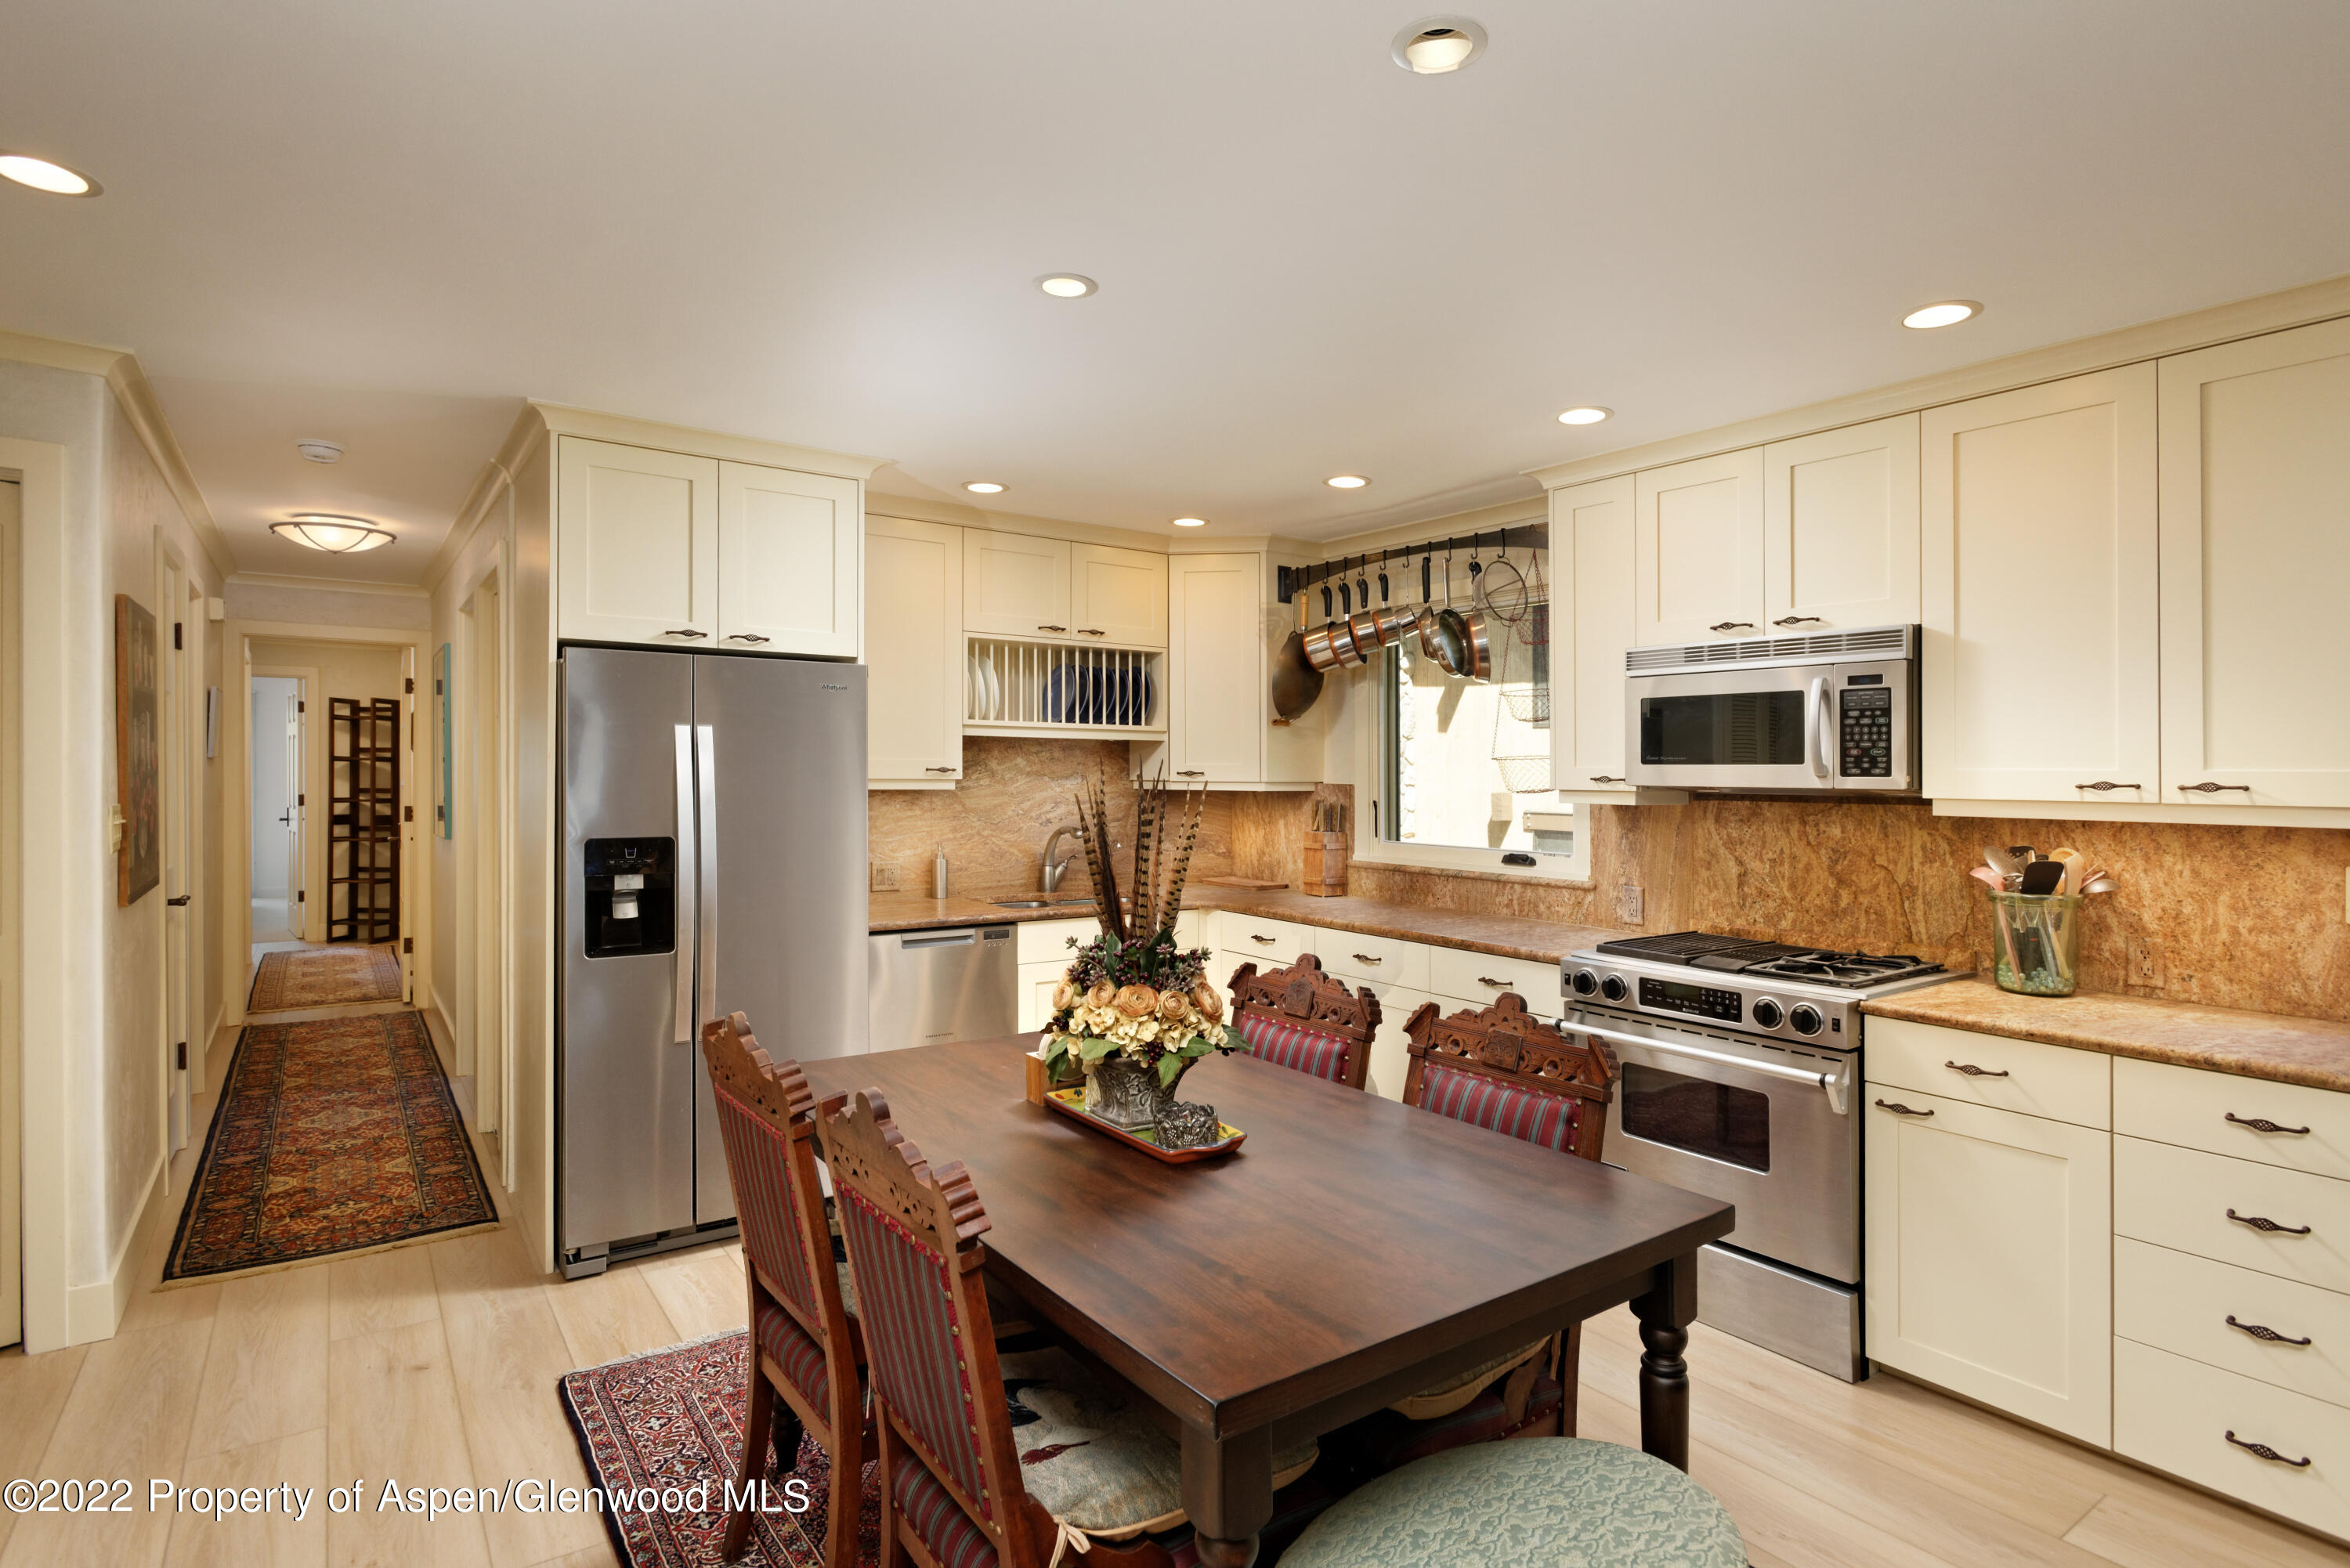 a kitchen with stainless steel appliances granite countertop a kitchen island hardwood floor a dining table and chairs